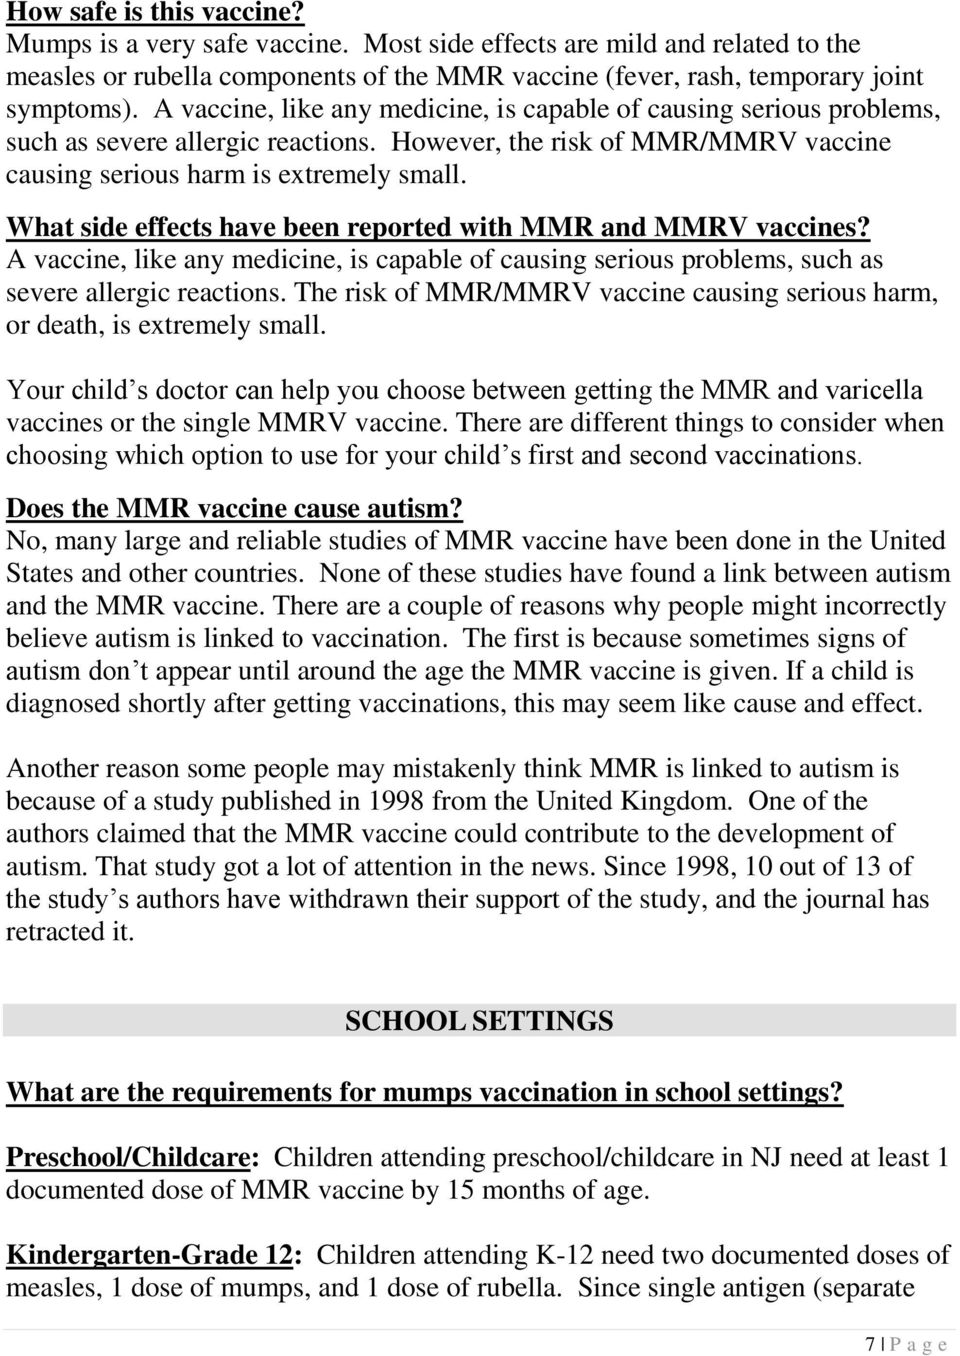 What side effects have been reported with MMR and MMRV vaccines? A vaccine, like any medicine, is capable of causing serious problems, such as severe allergic reactions.